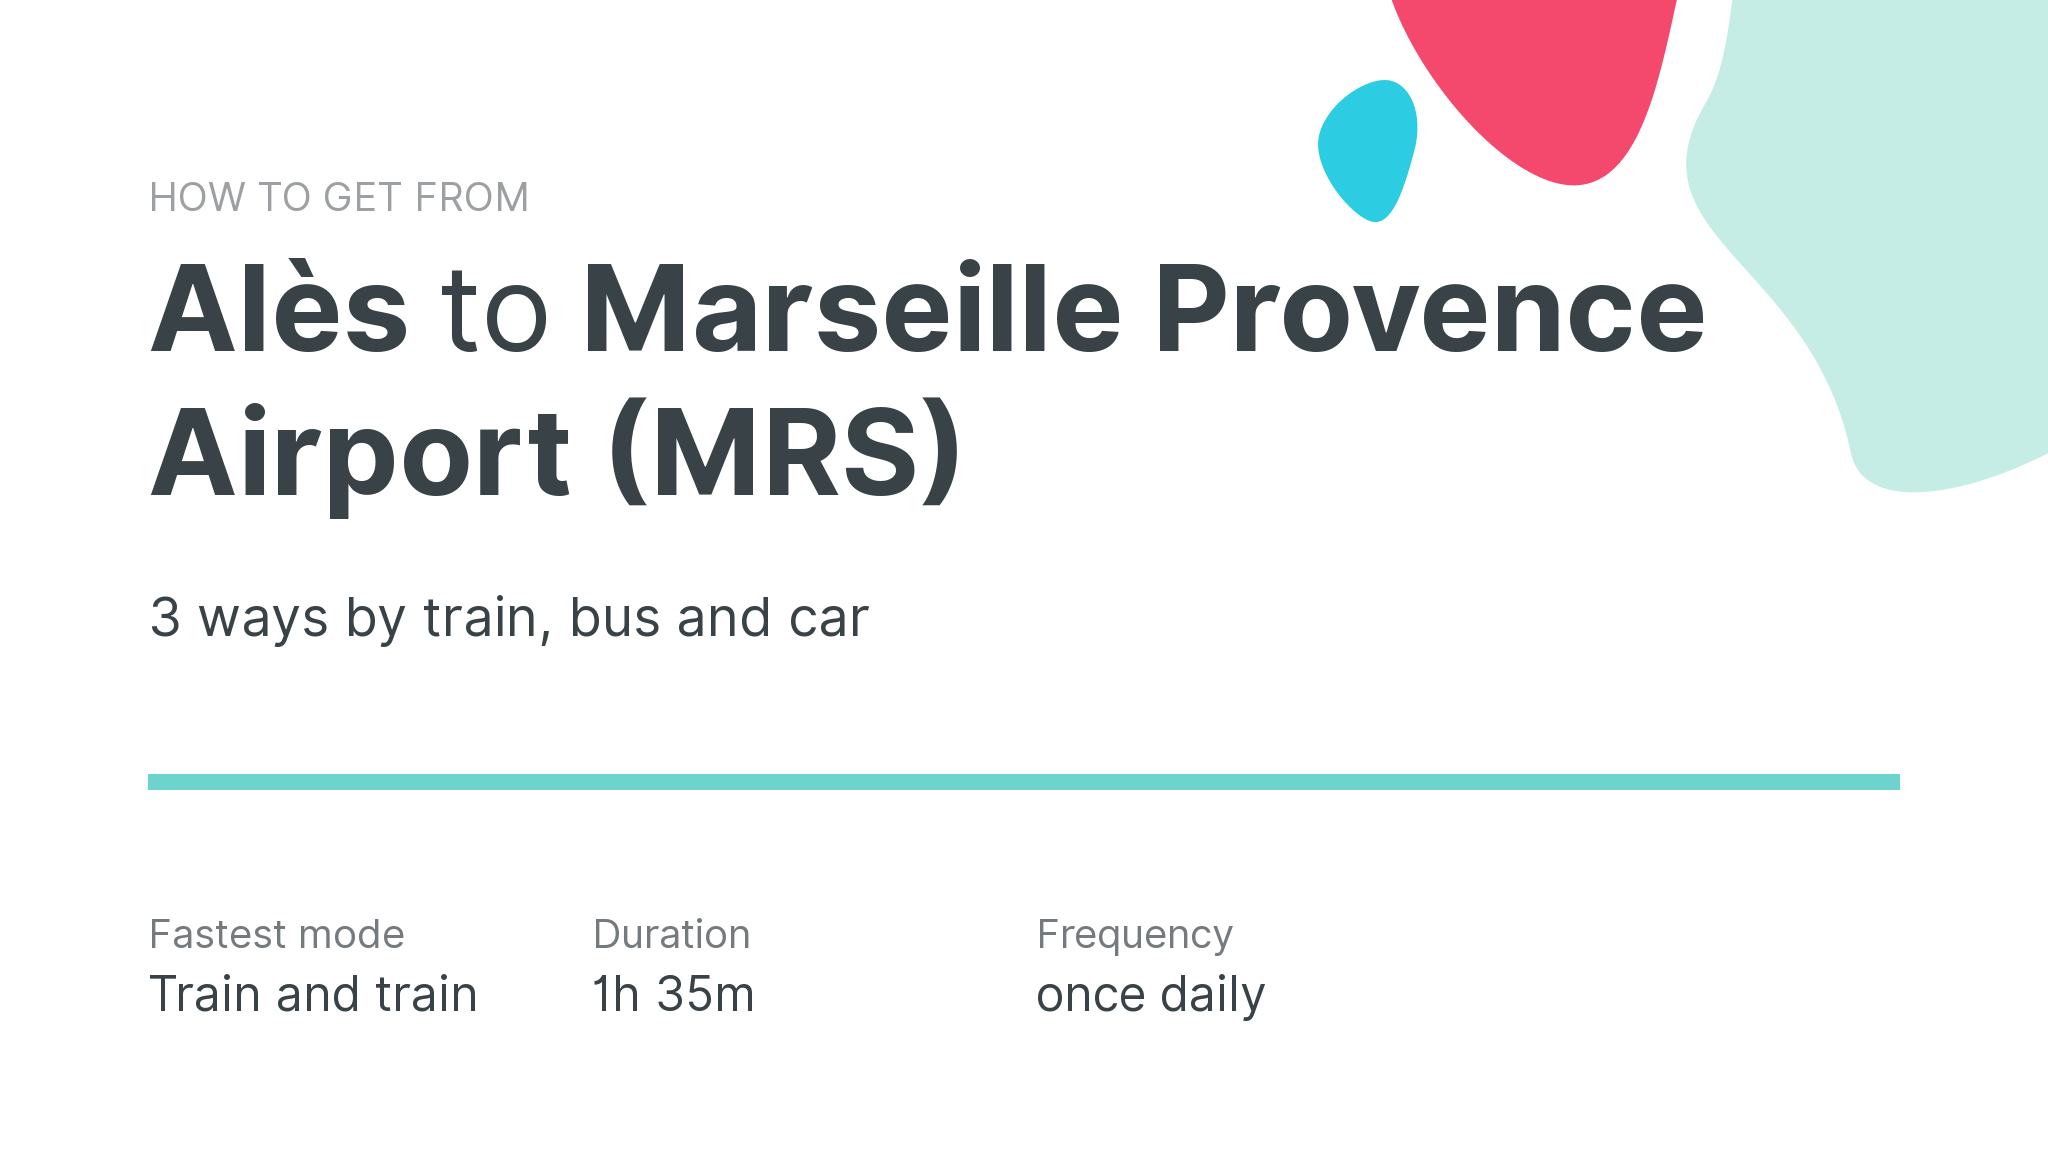 How do I get from Alès to Marseille Provence Airport (MRS)